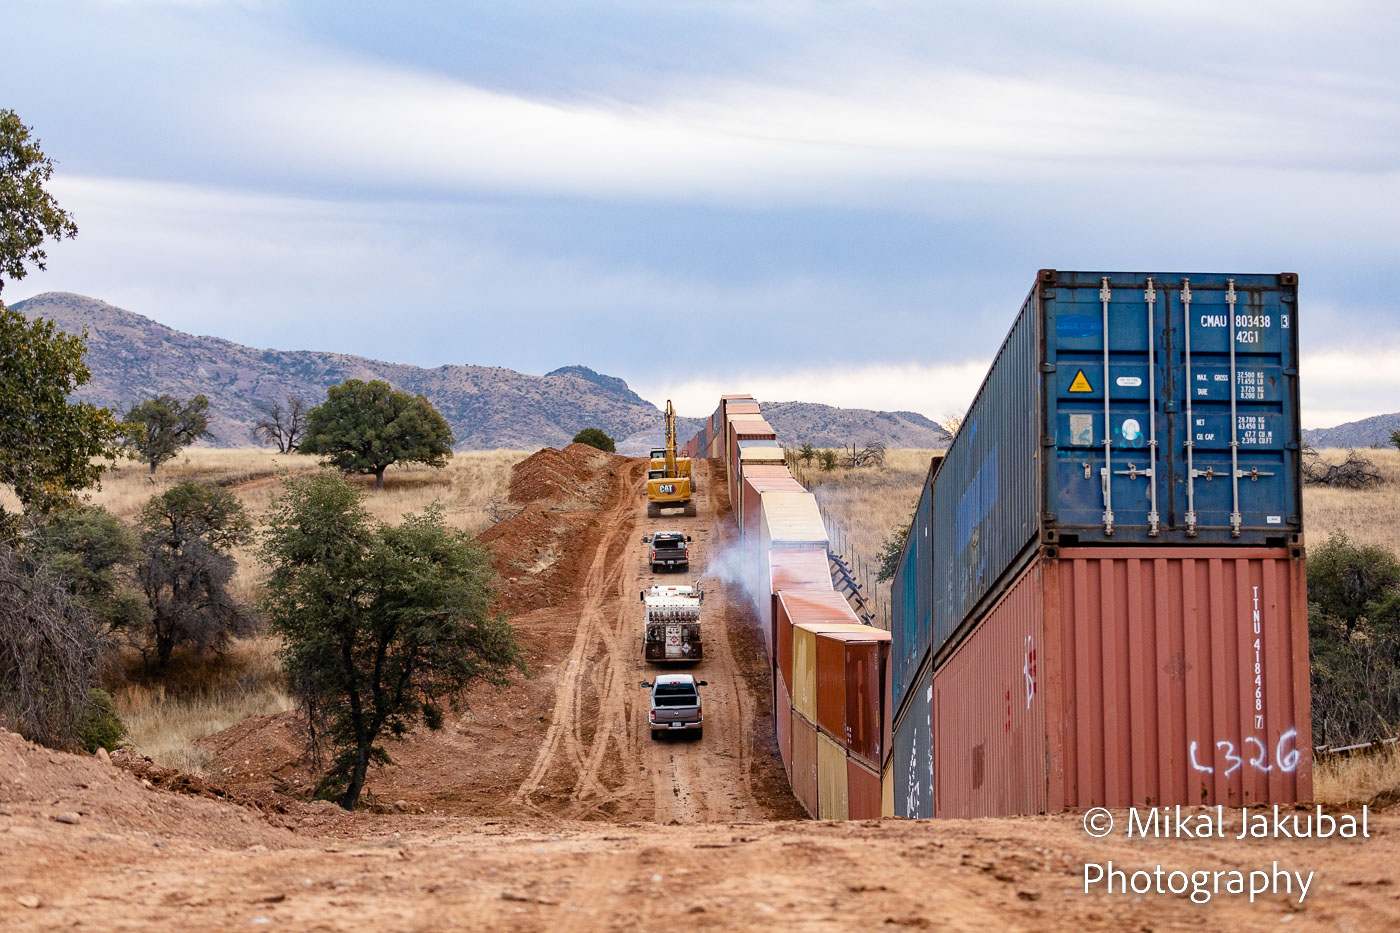 A line of heavy equipment and pickup trucks drives away along a dirt road next to a double-stacked line of shipping containers.